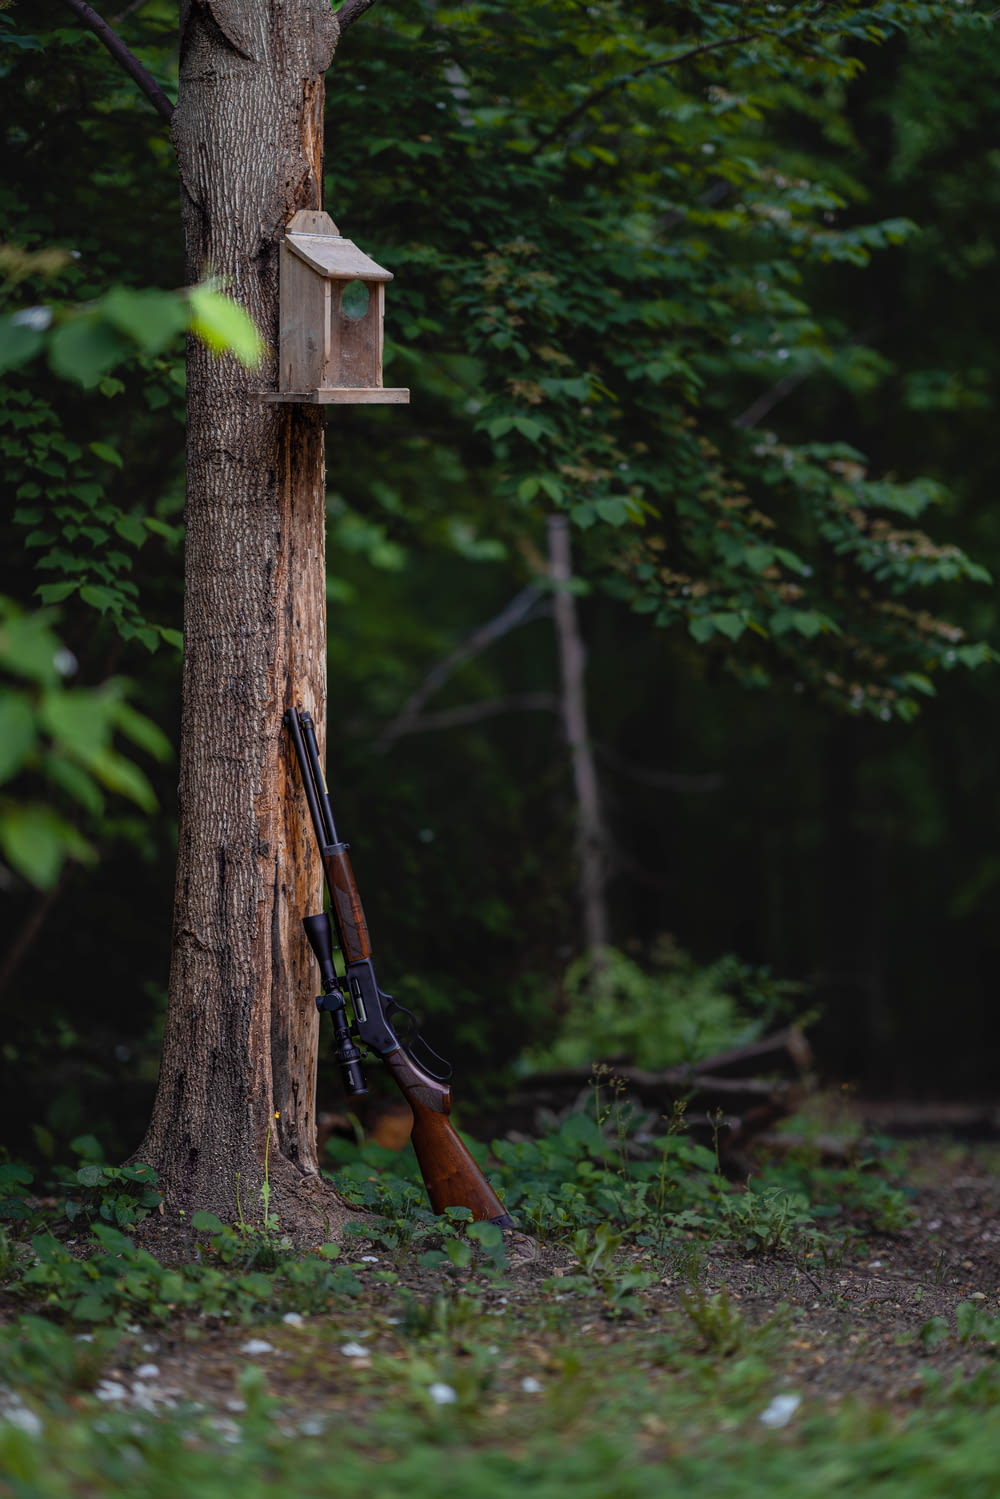 a bird house on a tree with a rifle in the foreground